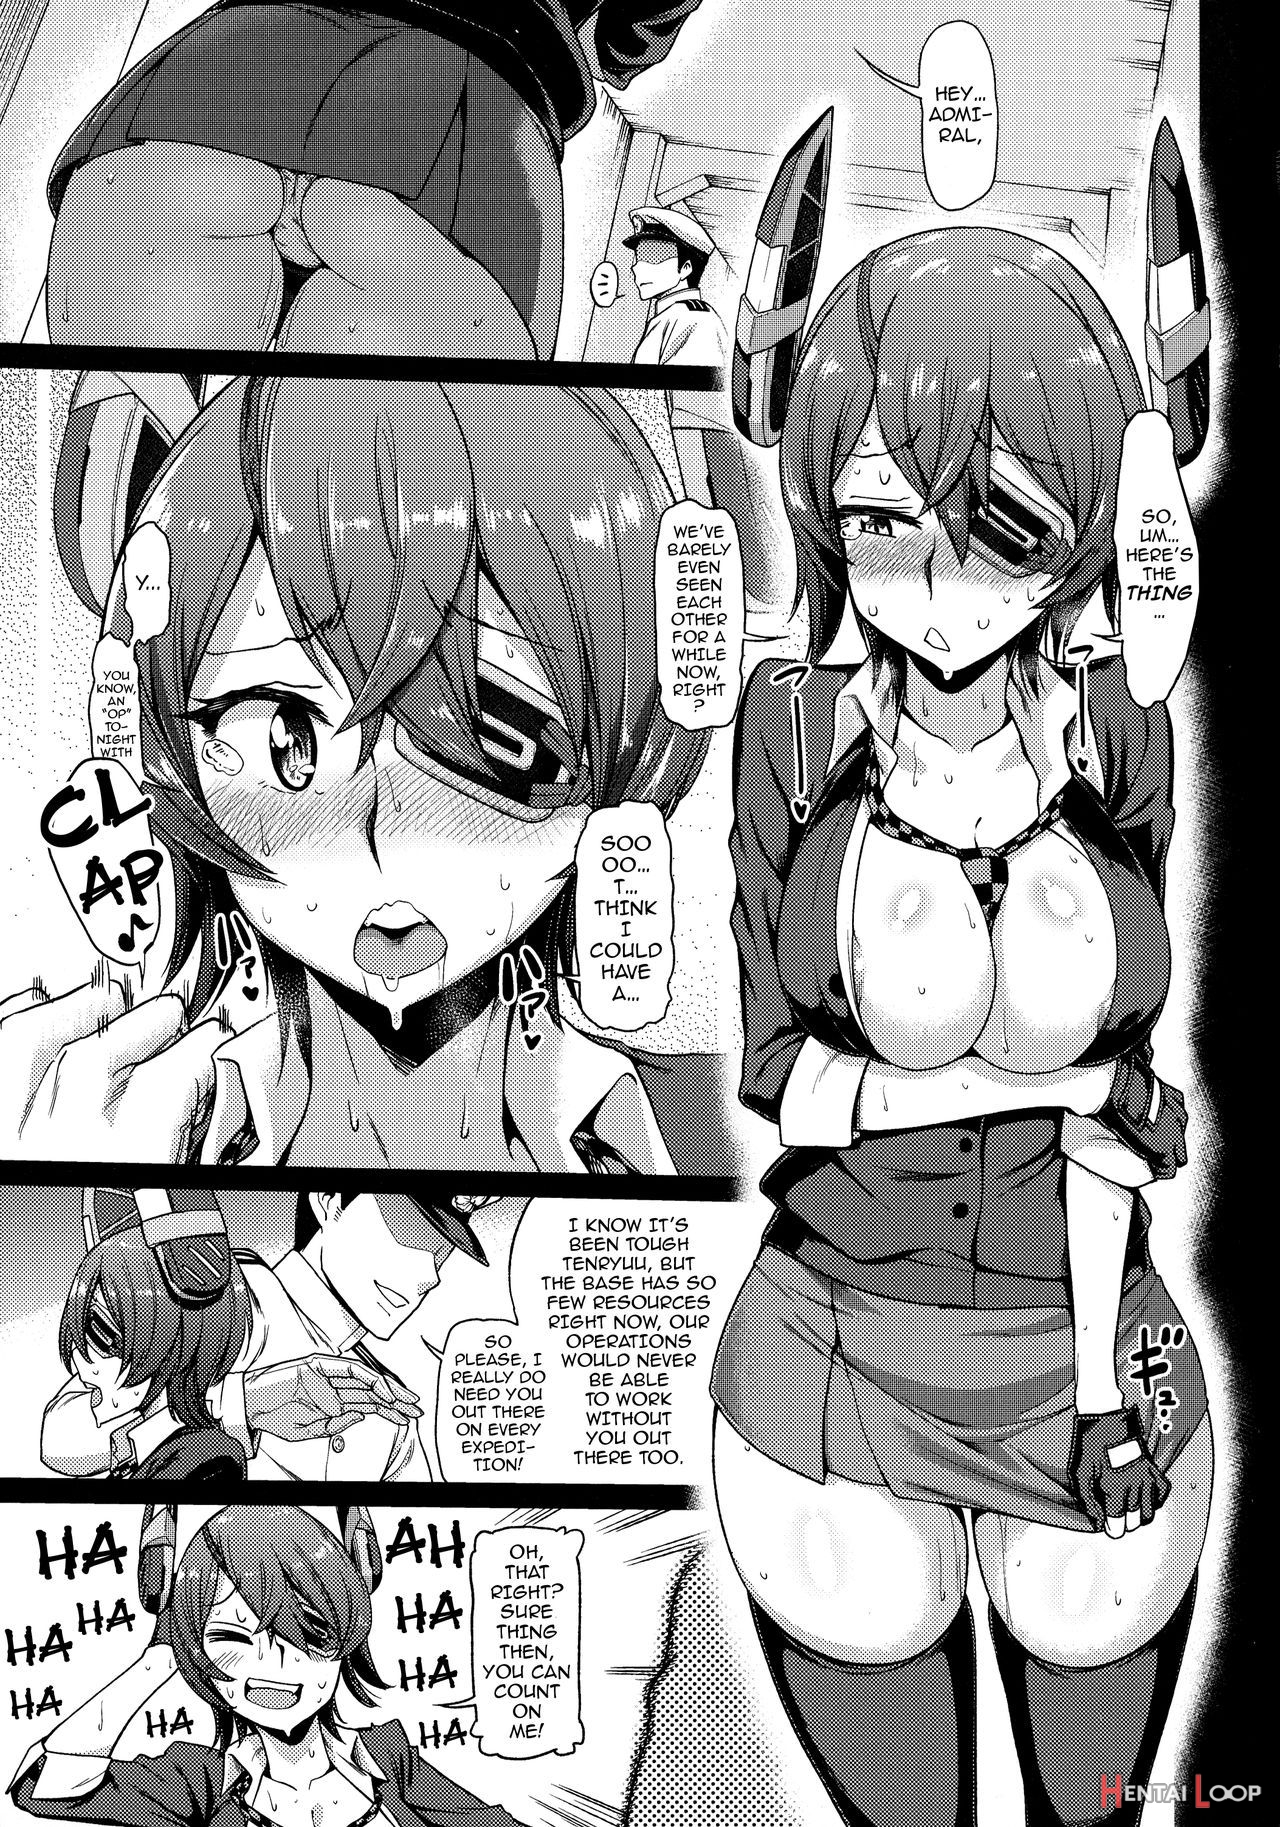 I Told You Supply Depot, This Tenryuu Belongs To You!! page 2